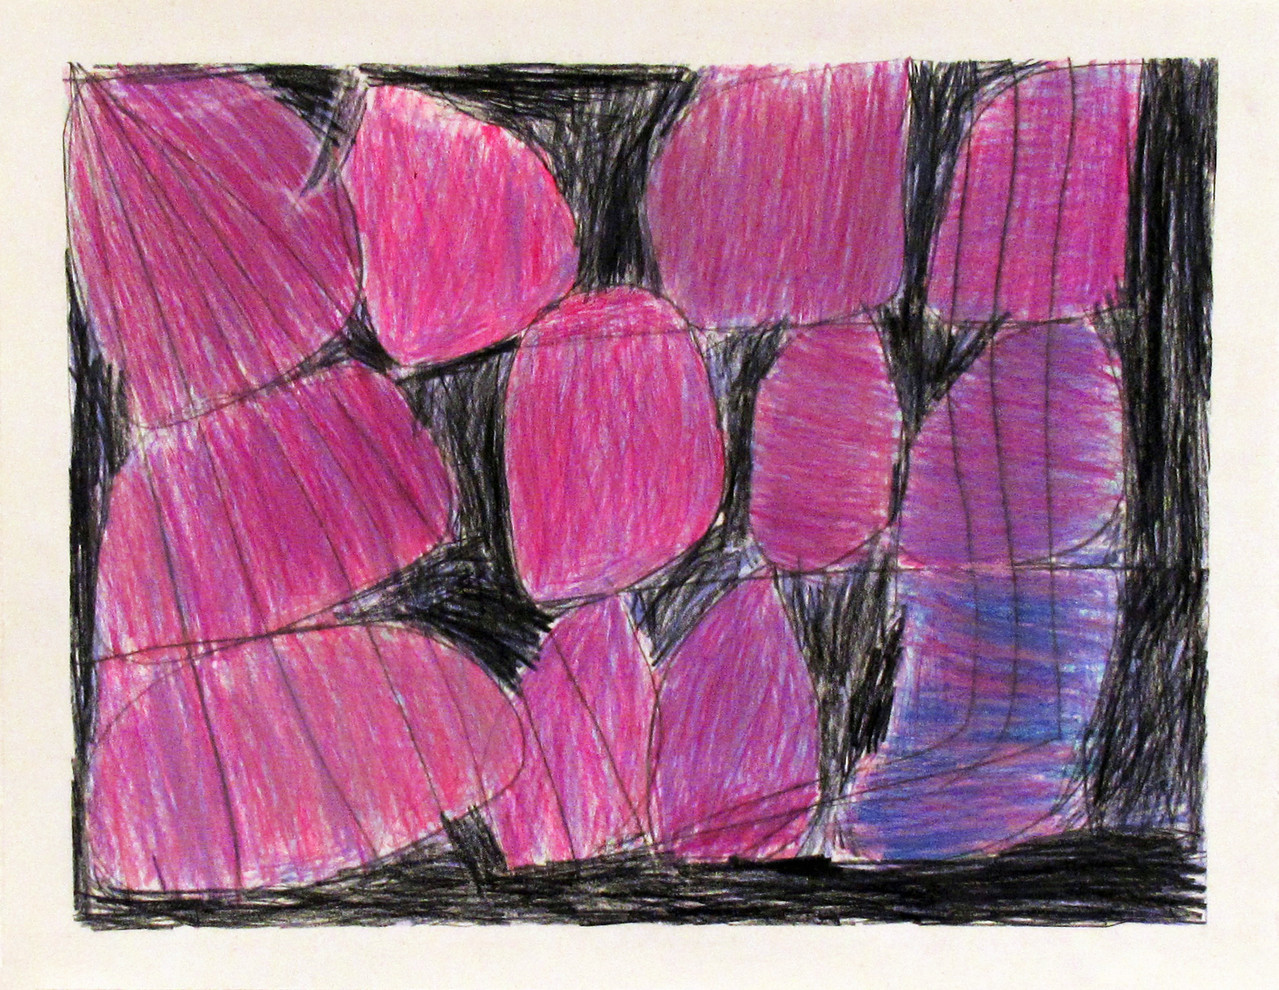 Untitled, 1988, Colored pencil and graphite on paper, 38.7 x 47 cm, BS 021